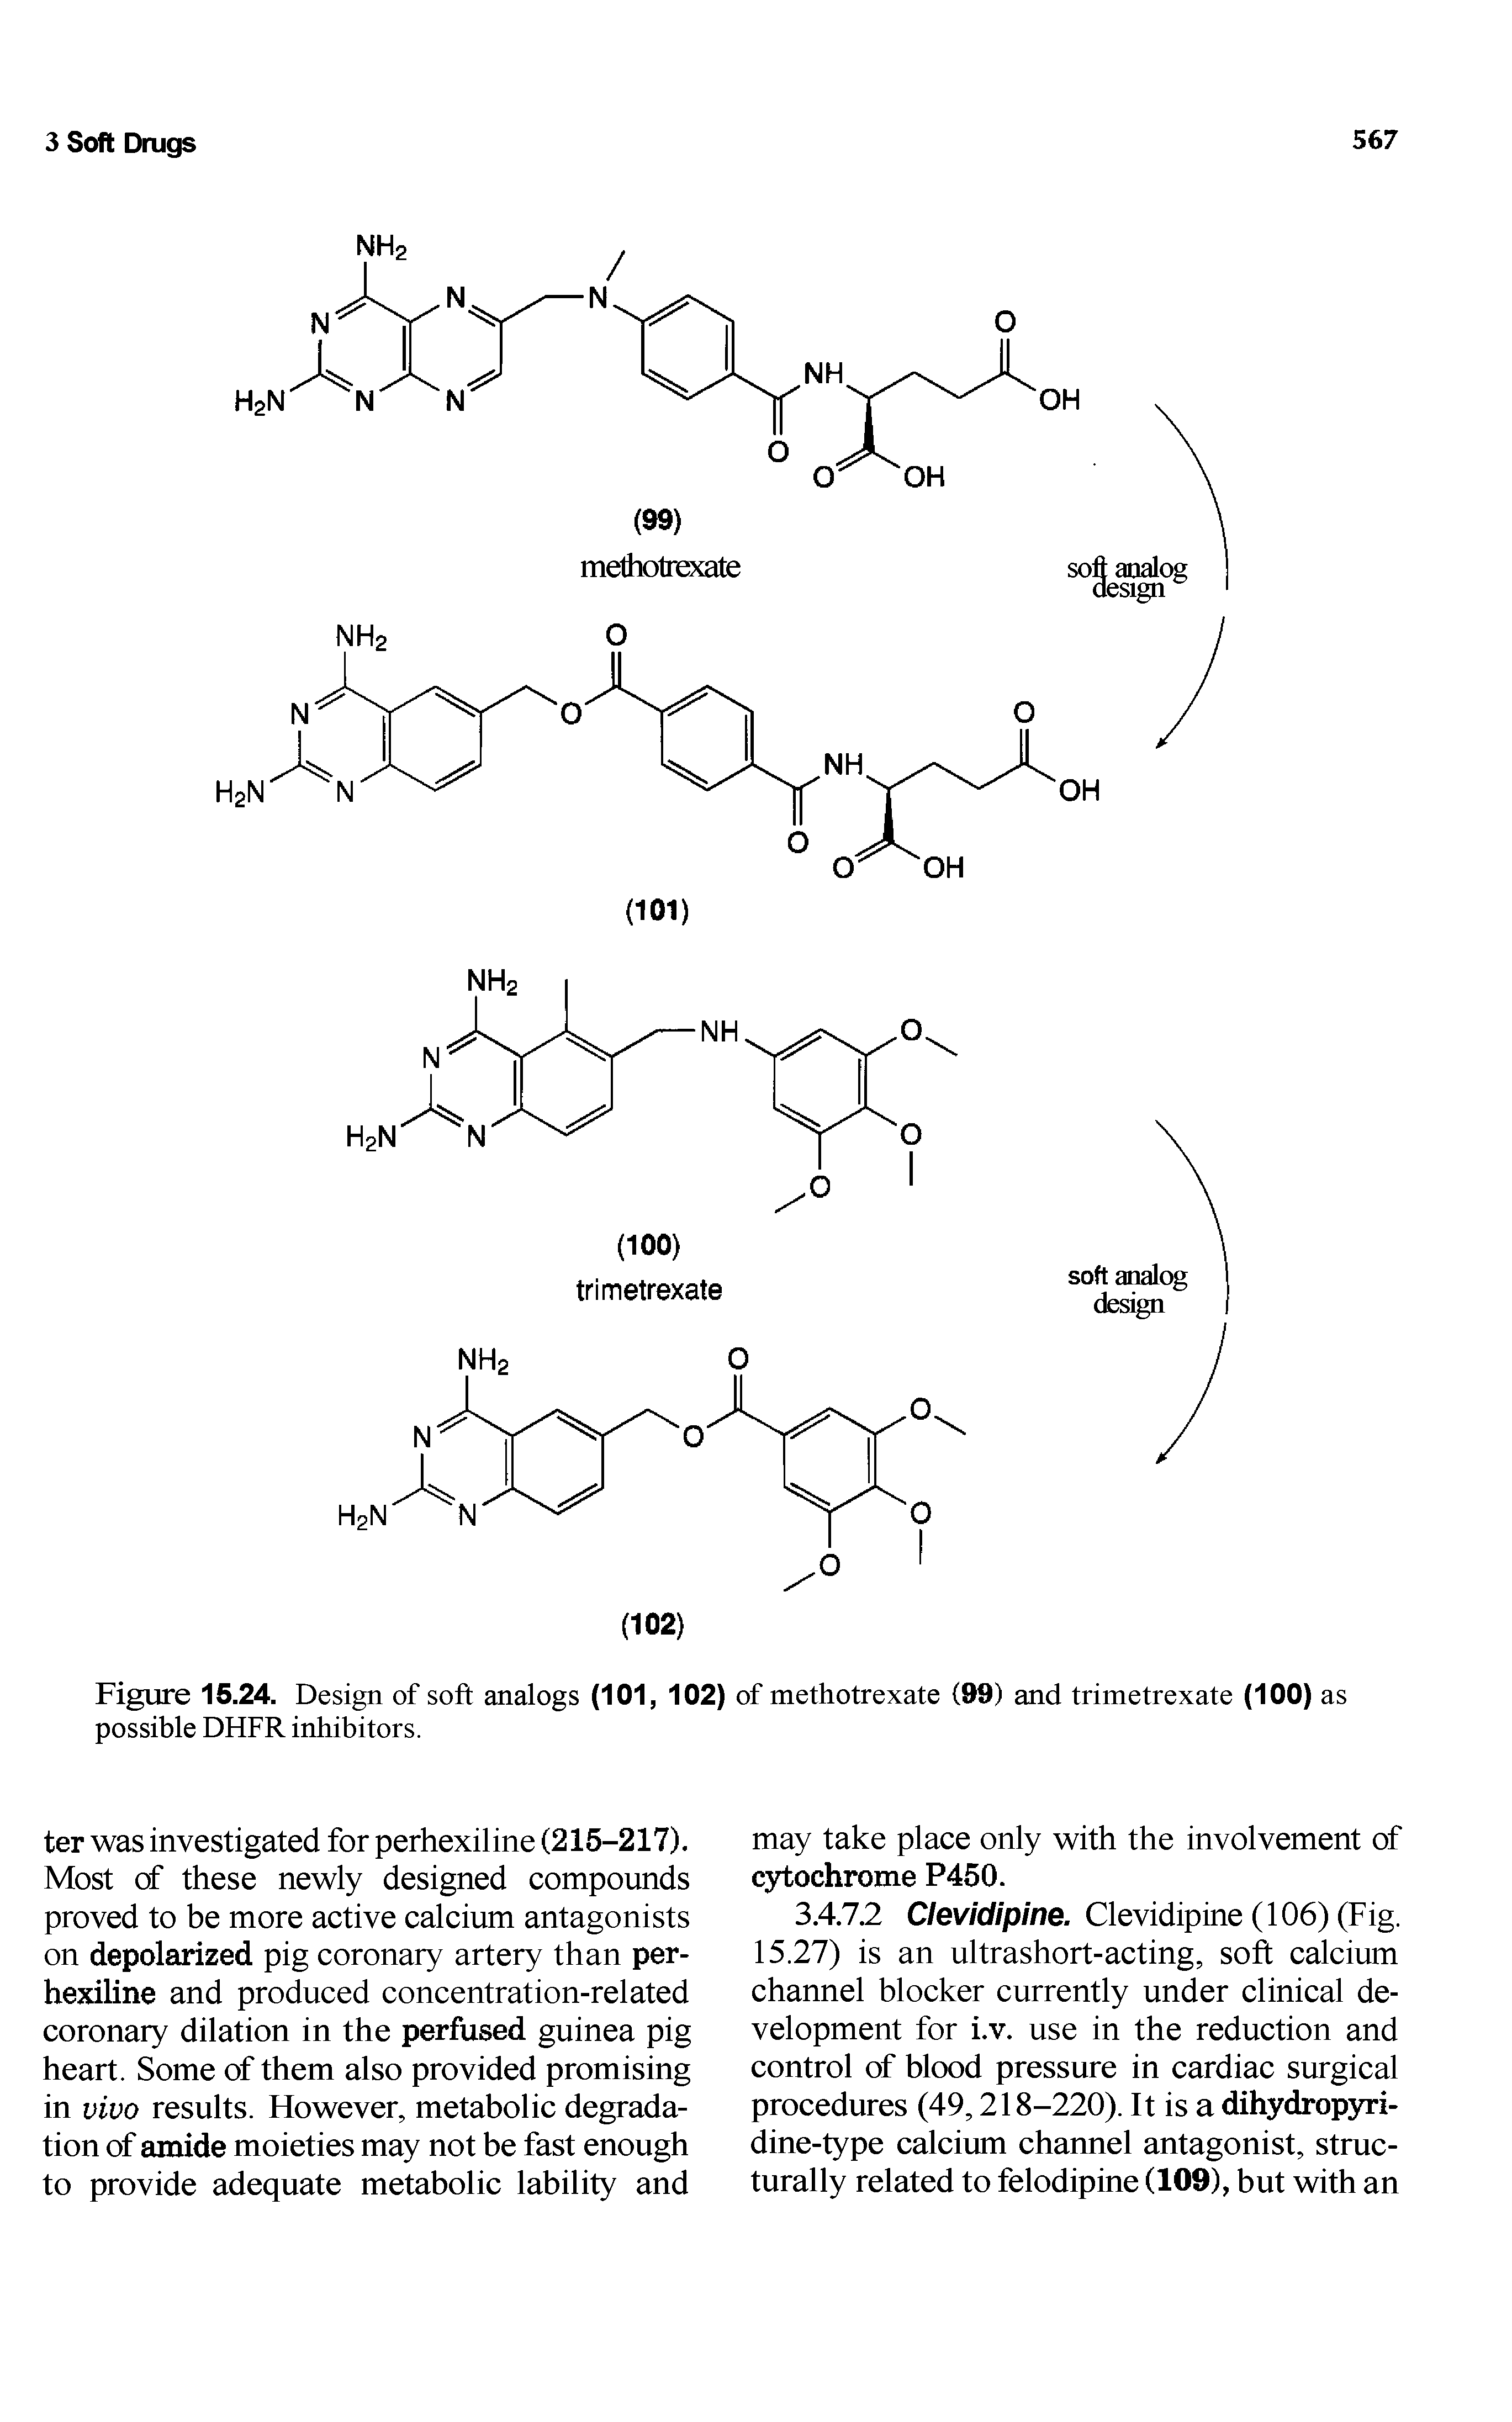 Figure 15.24. Design of soft analogs (101, 102) of methotrexate (99) and trimetrexate (100) as possible DHFR inhibitors.